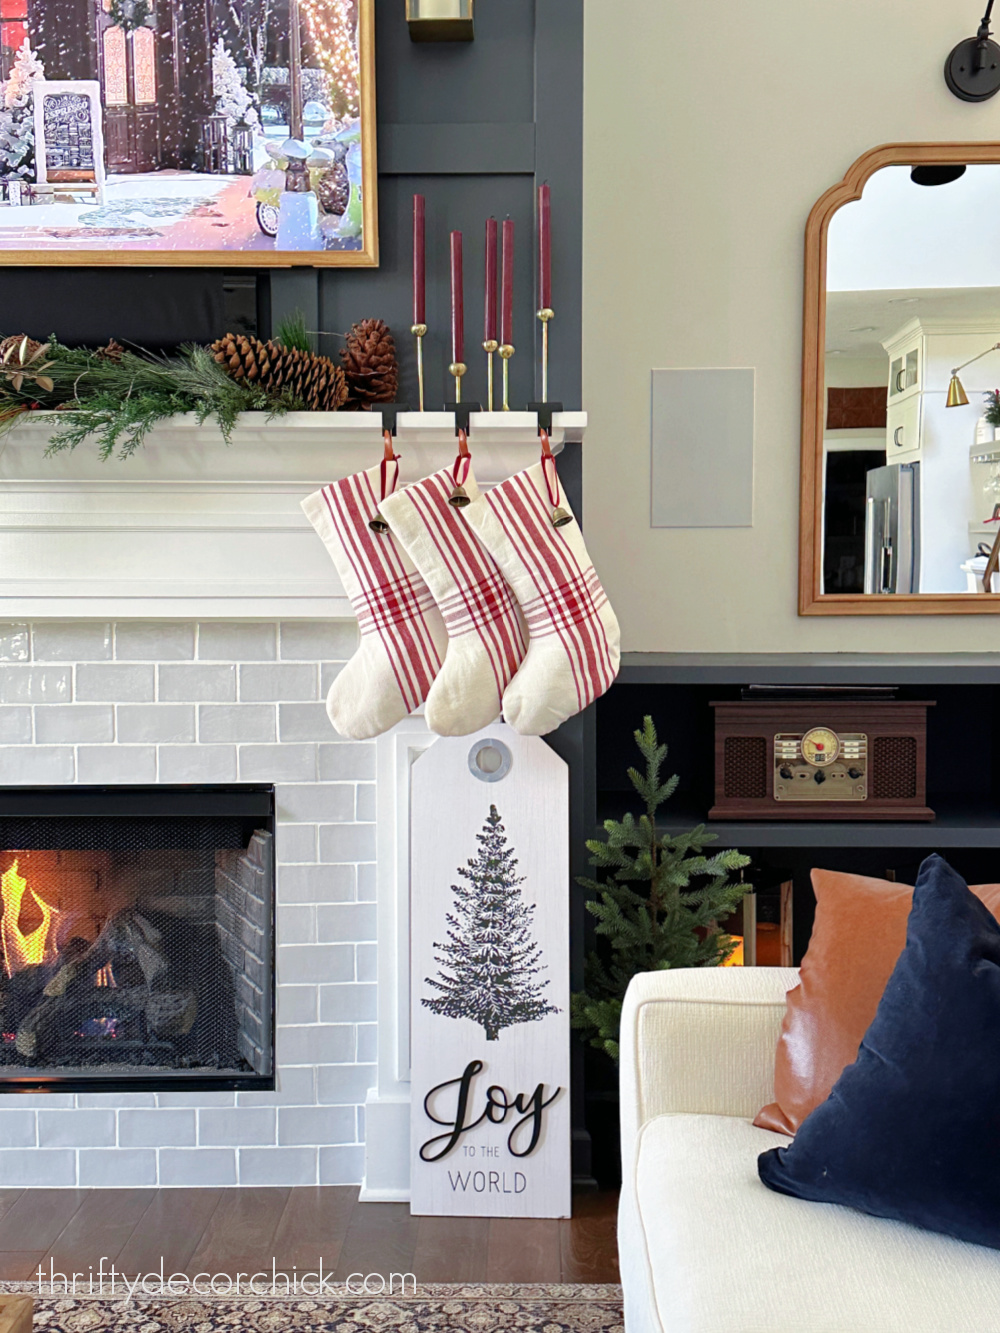 red and white stockings on mantel